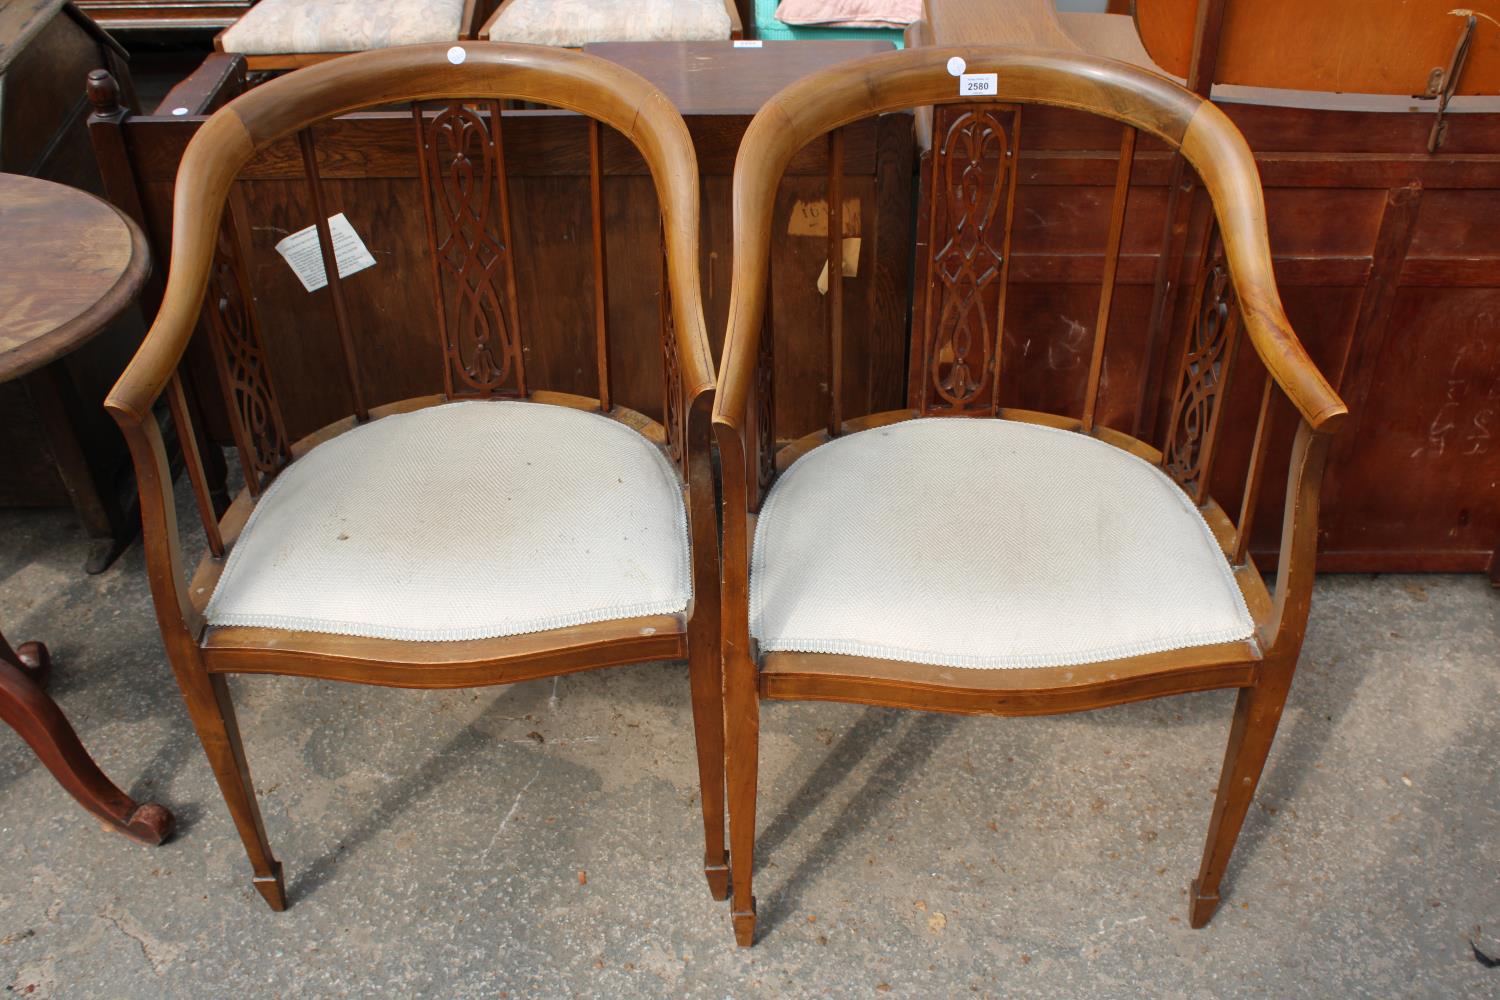 A PAIR OF EDWARDIAN MAHOGANY AND INLAID TUB CHAIRS WITH SWEPT BACKS, ARMS AND PIERCED PANELS